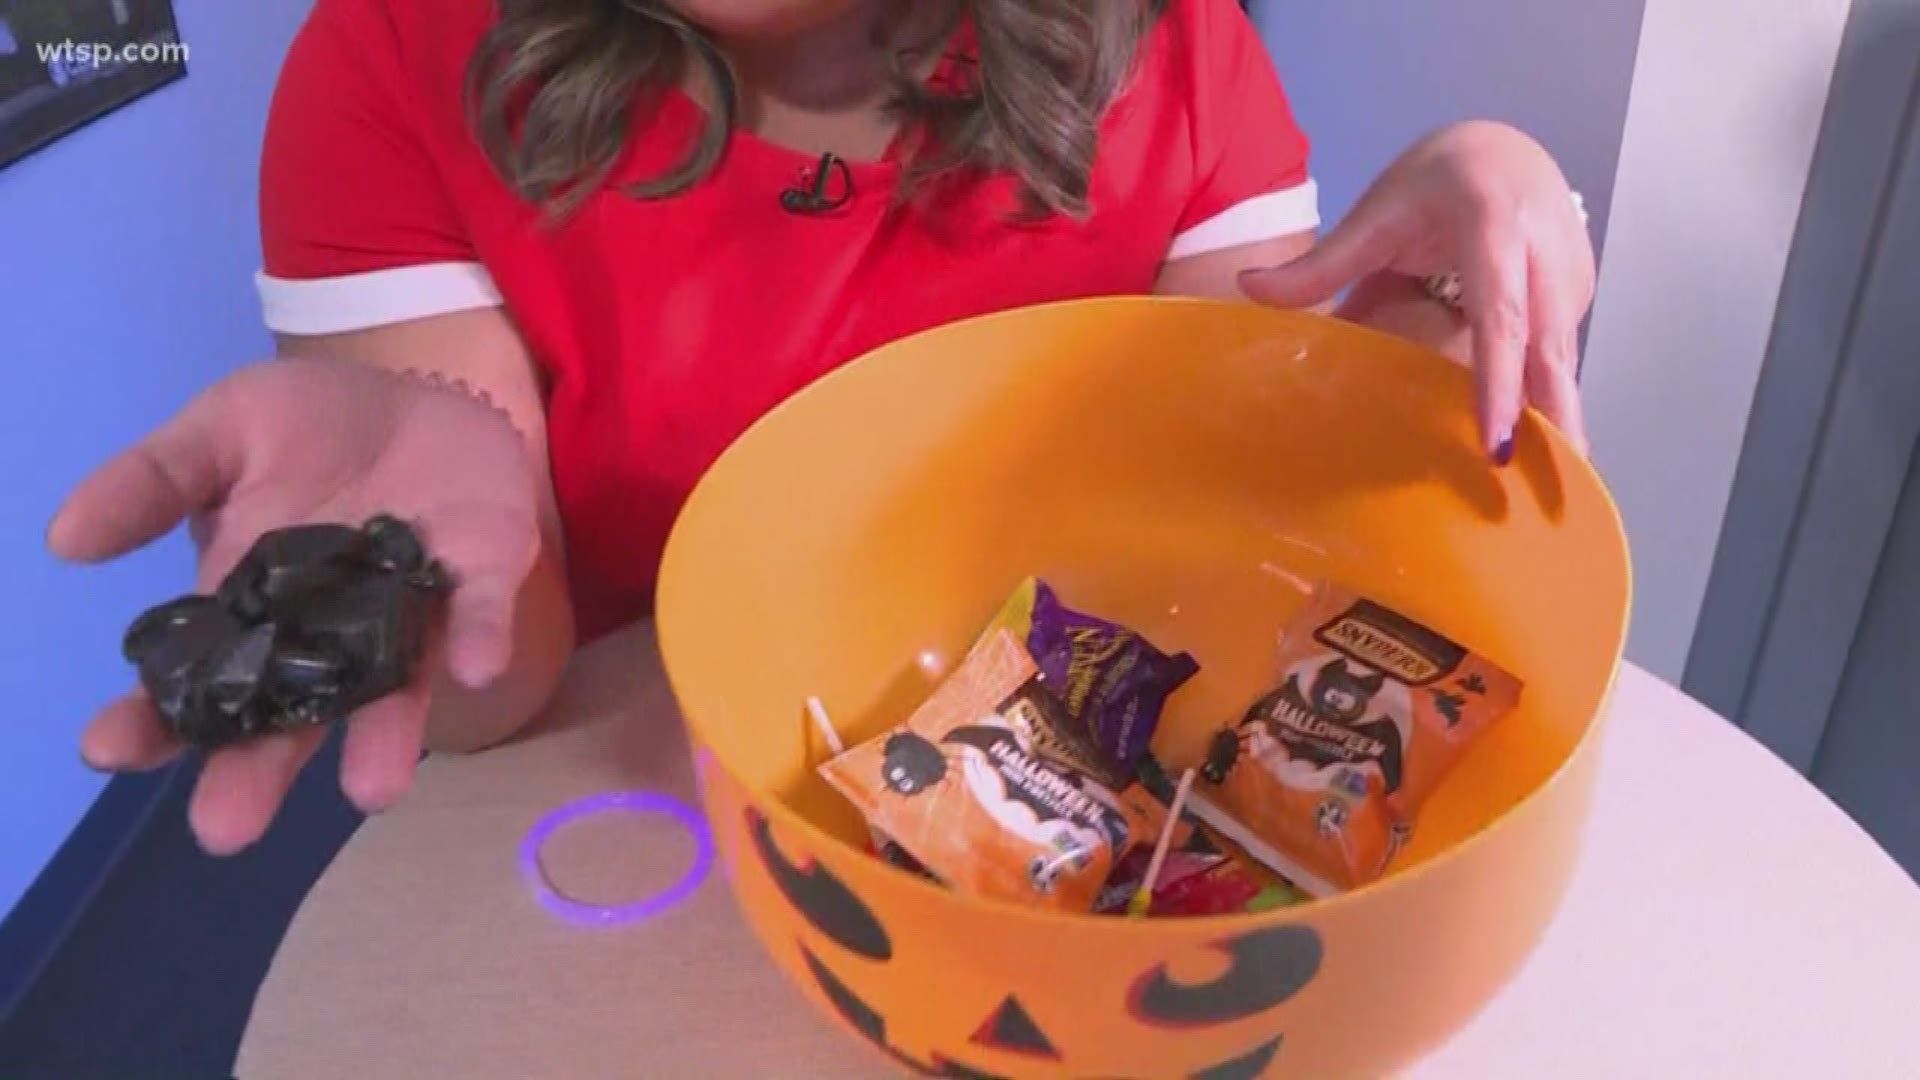 10News reporter Thuy Lan Nguyen has tips on how to keep children safe on Halloween.